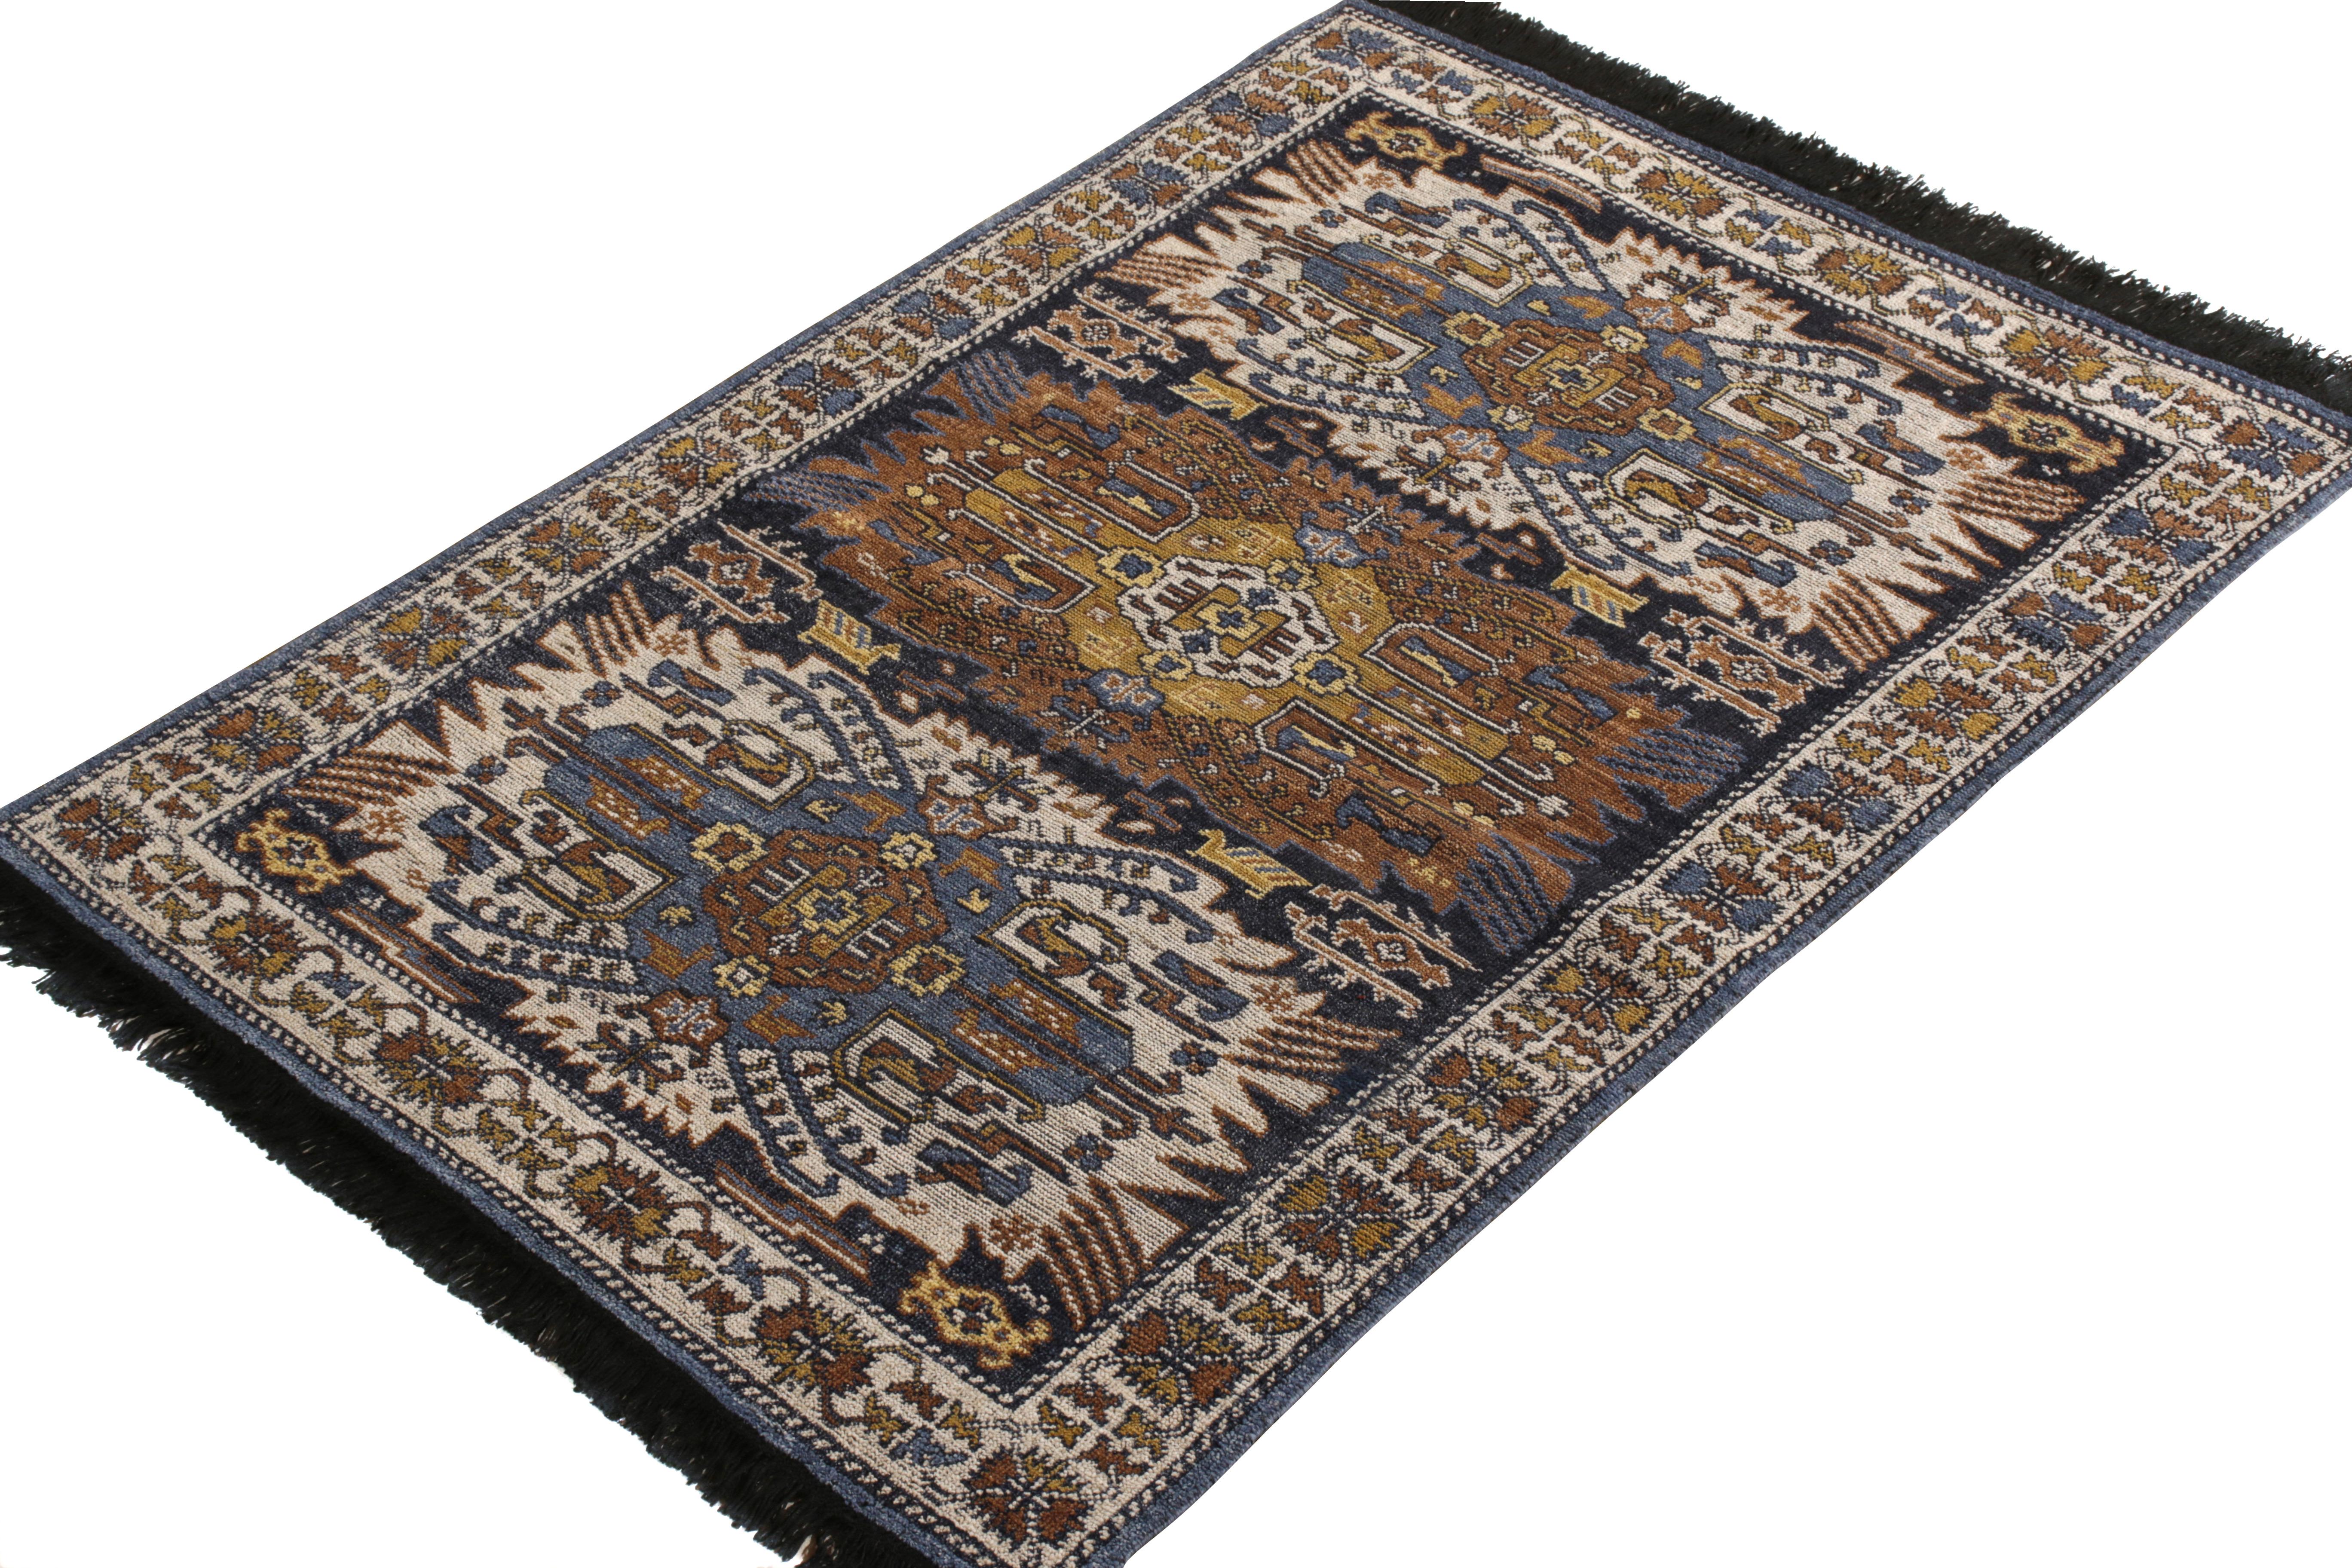 Indian Rug & Kilim’s Tribal Style Rug in Beige-Brown and Blue Geometric Pattern For Sale